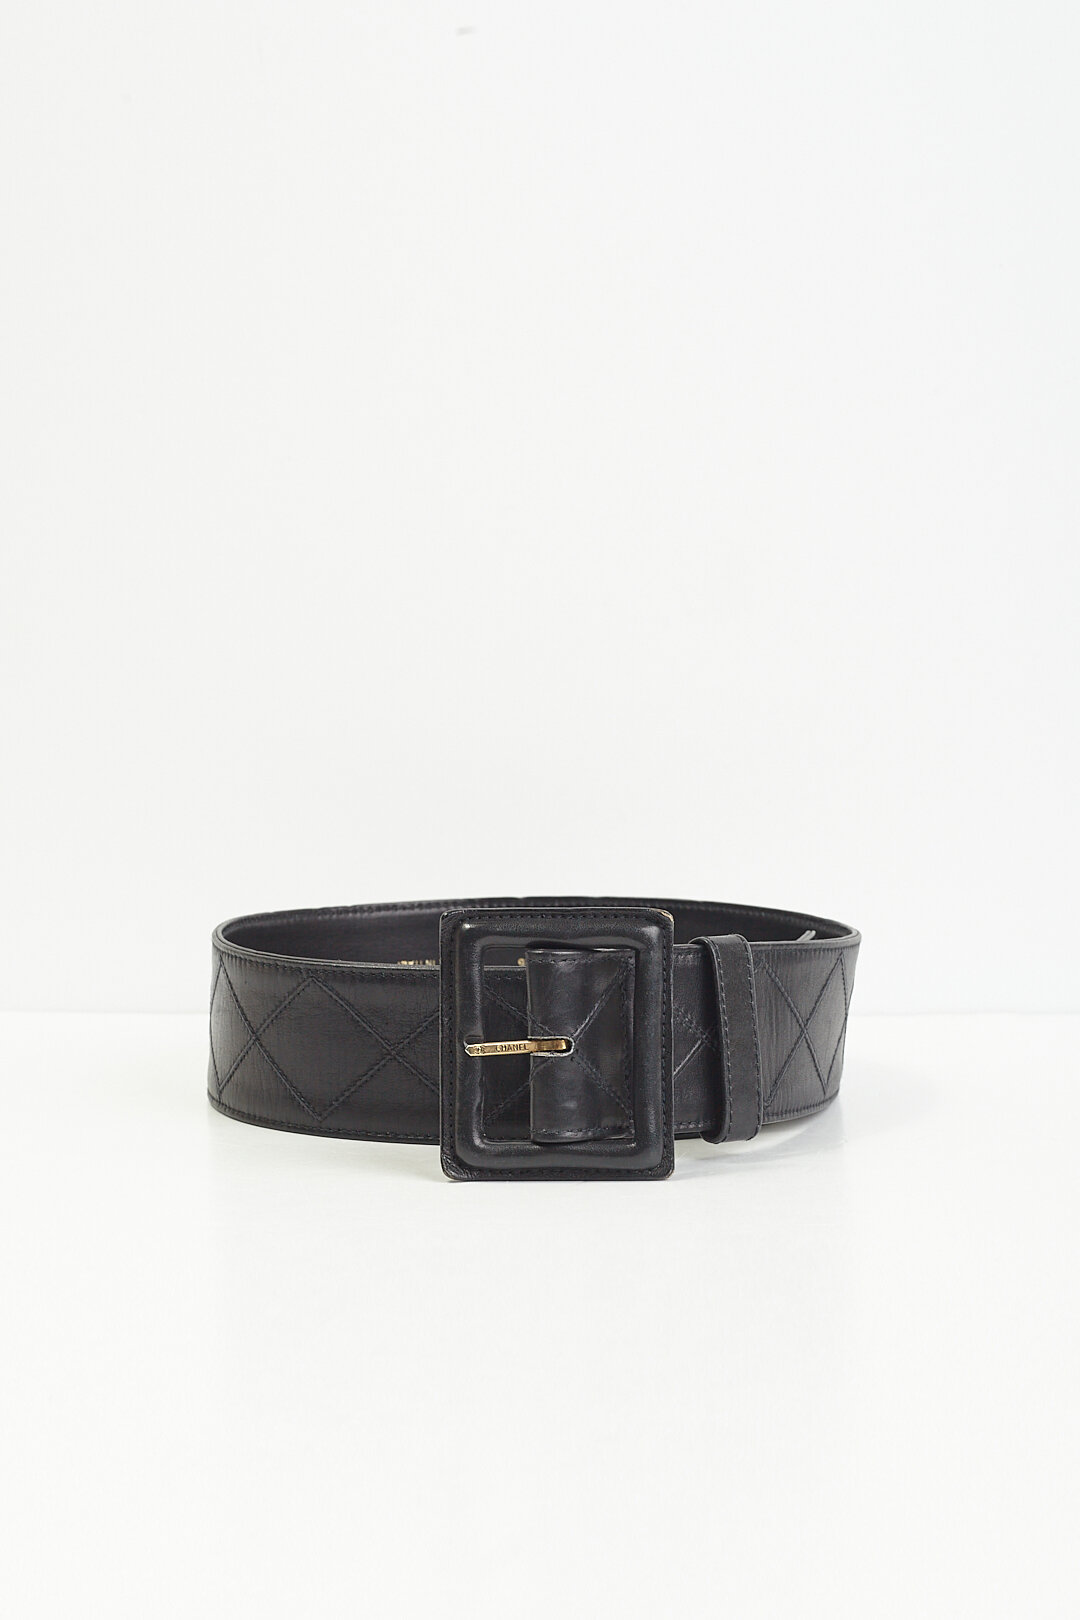 CHANEL 90s Black Leather Quilted Belt — Garment